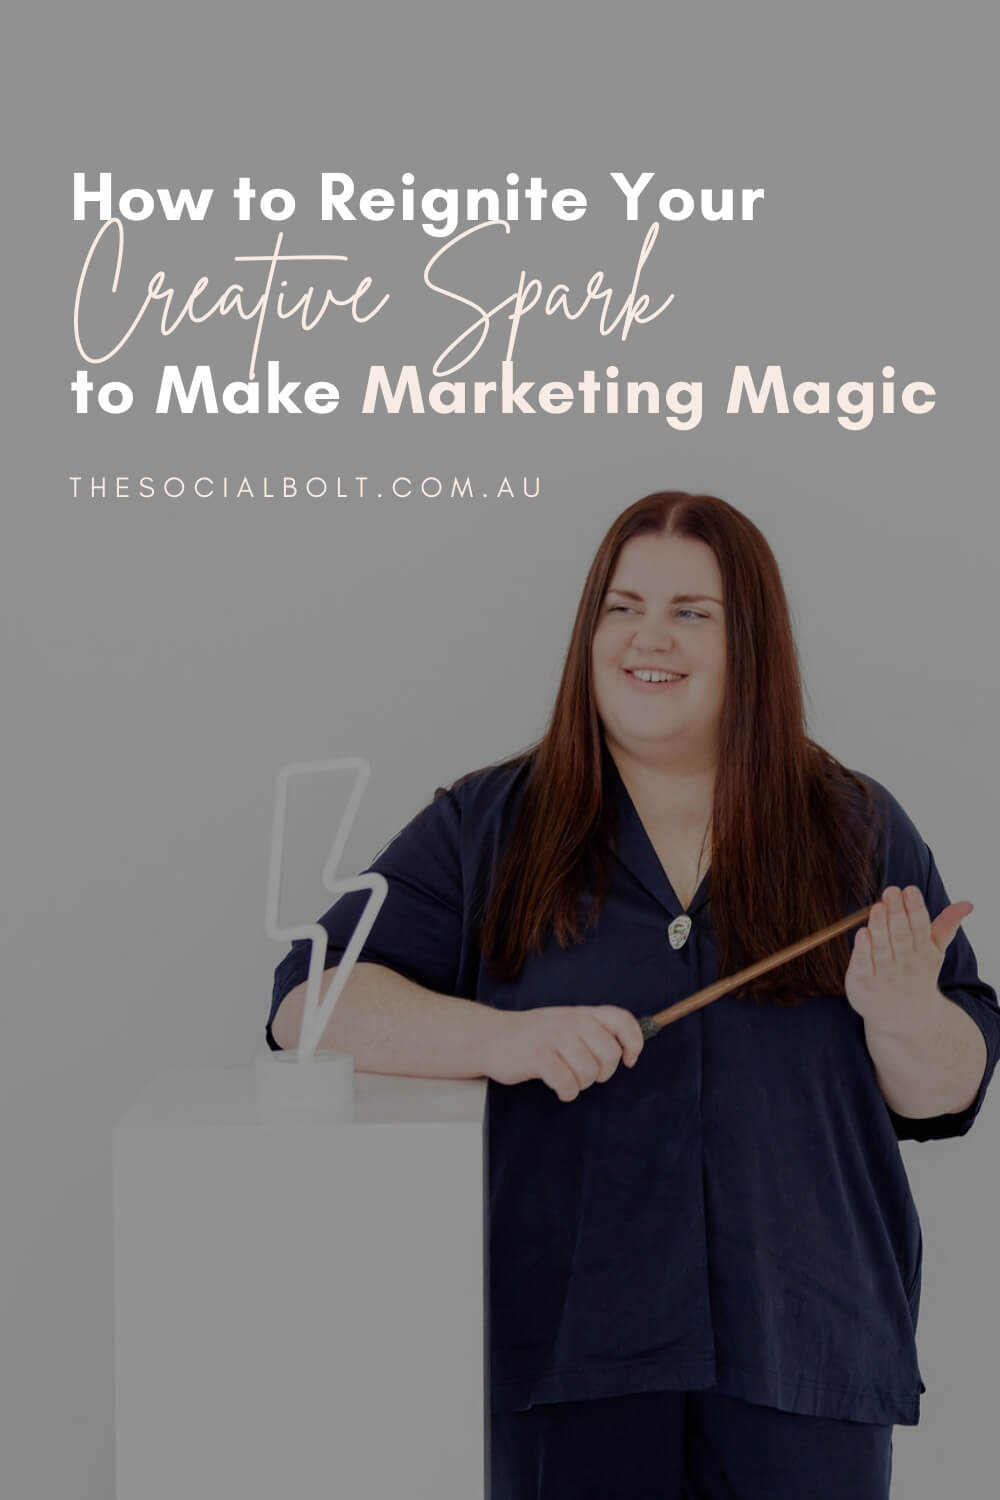 How to Reignite Your Creative Spark to Make Marketing Magic